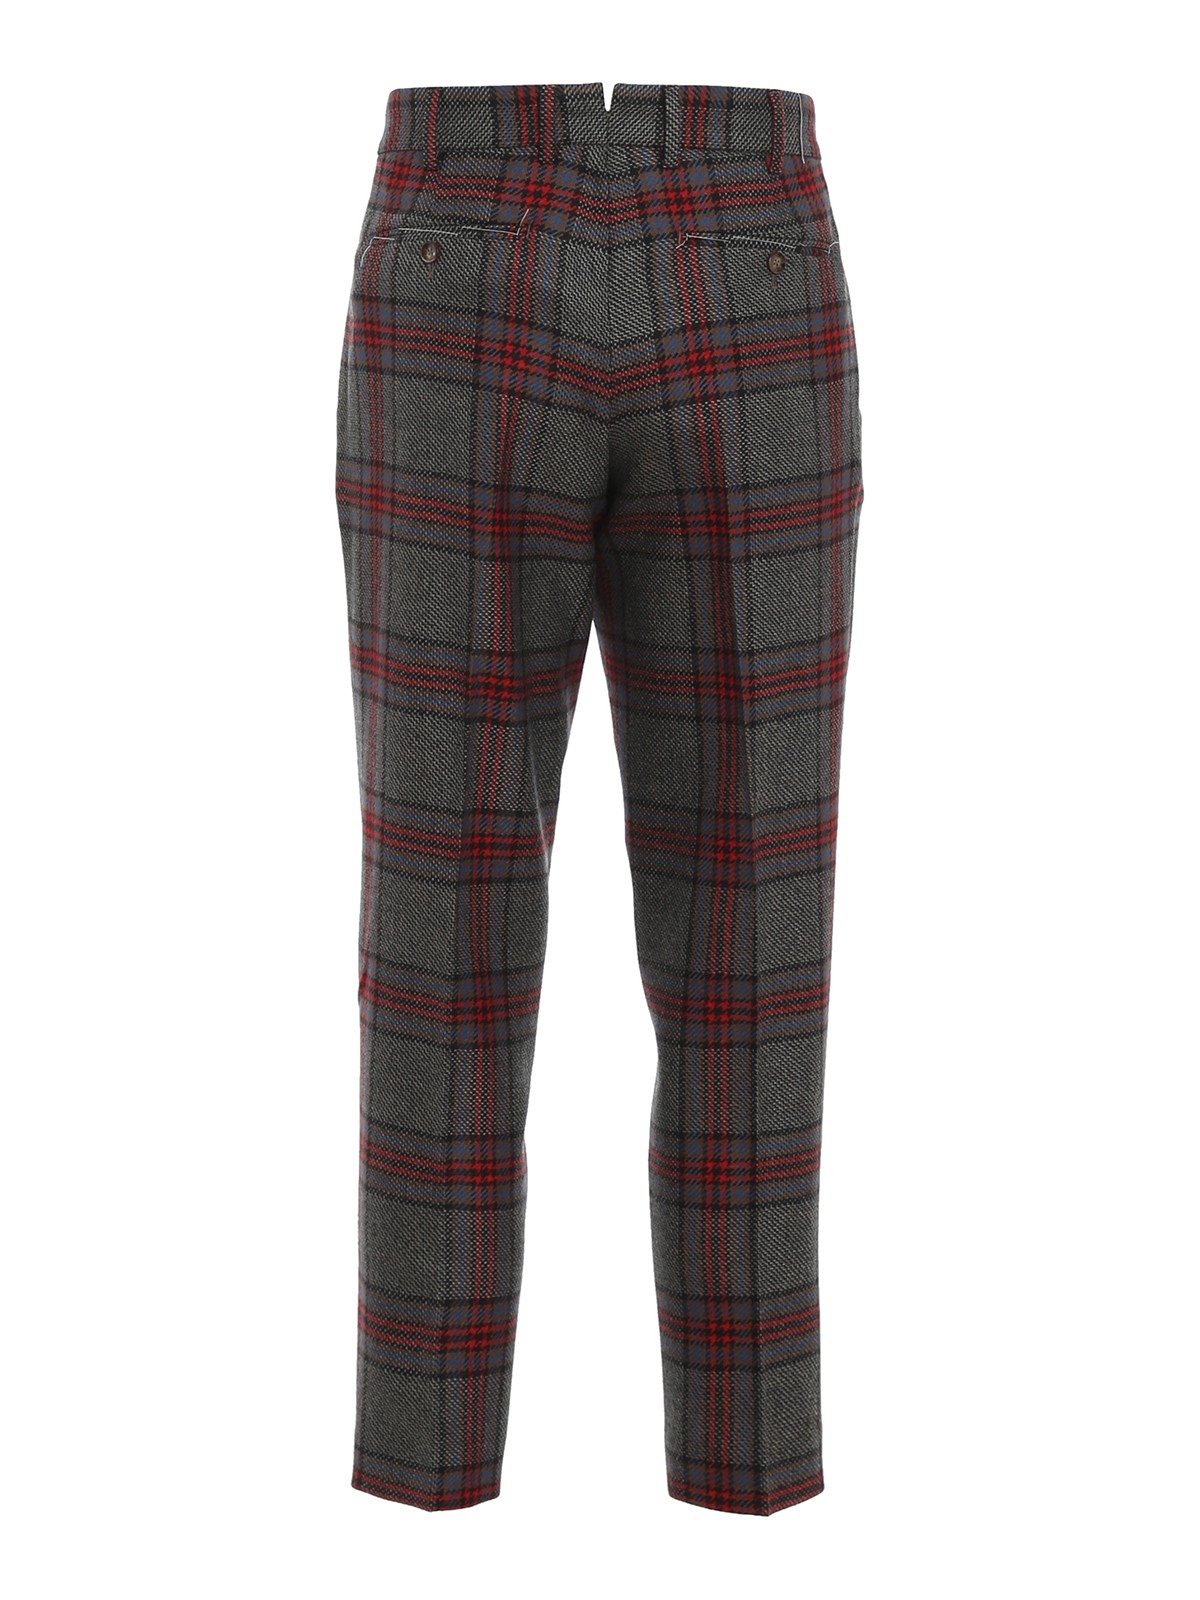 Pt Torino - Prince of Wales pants - Tailored & Formal trousers ...